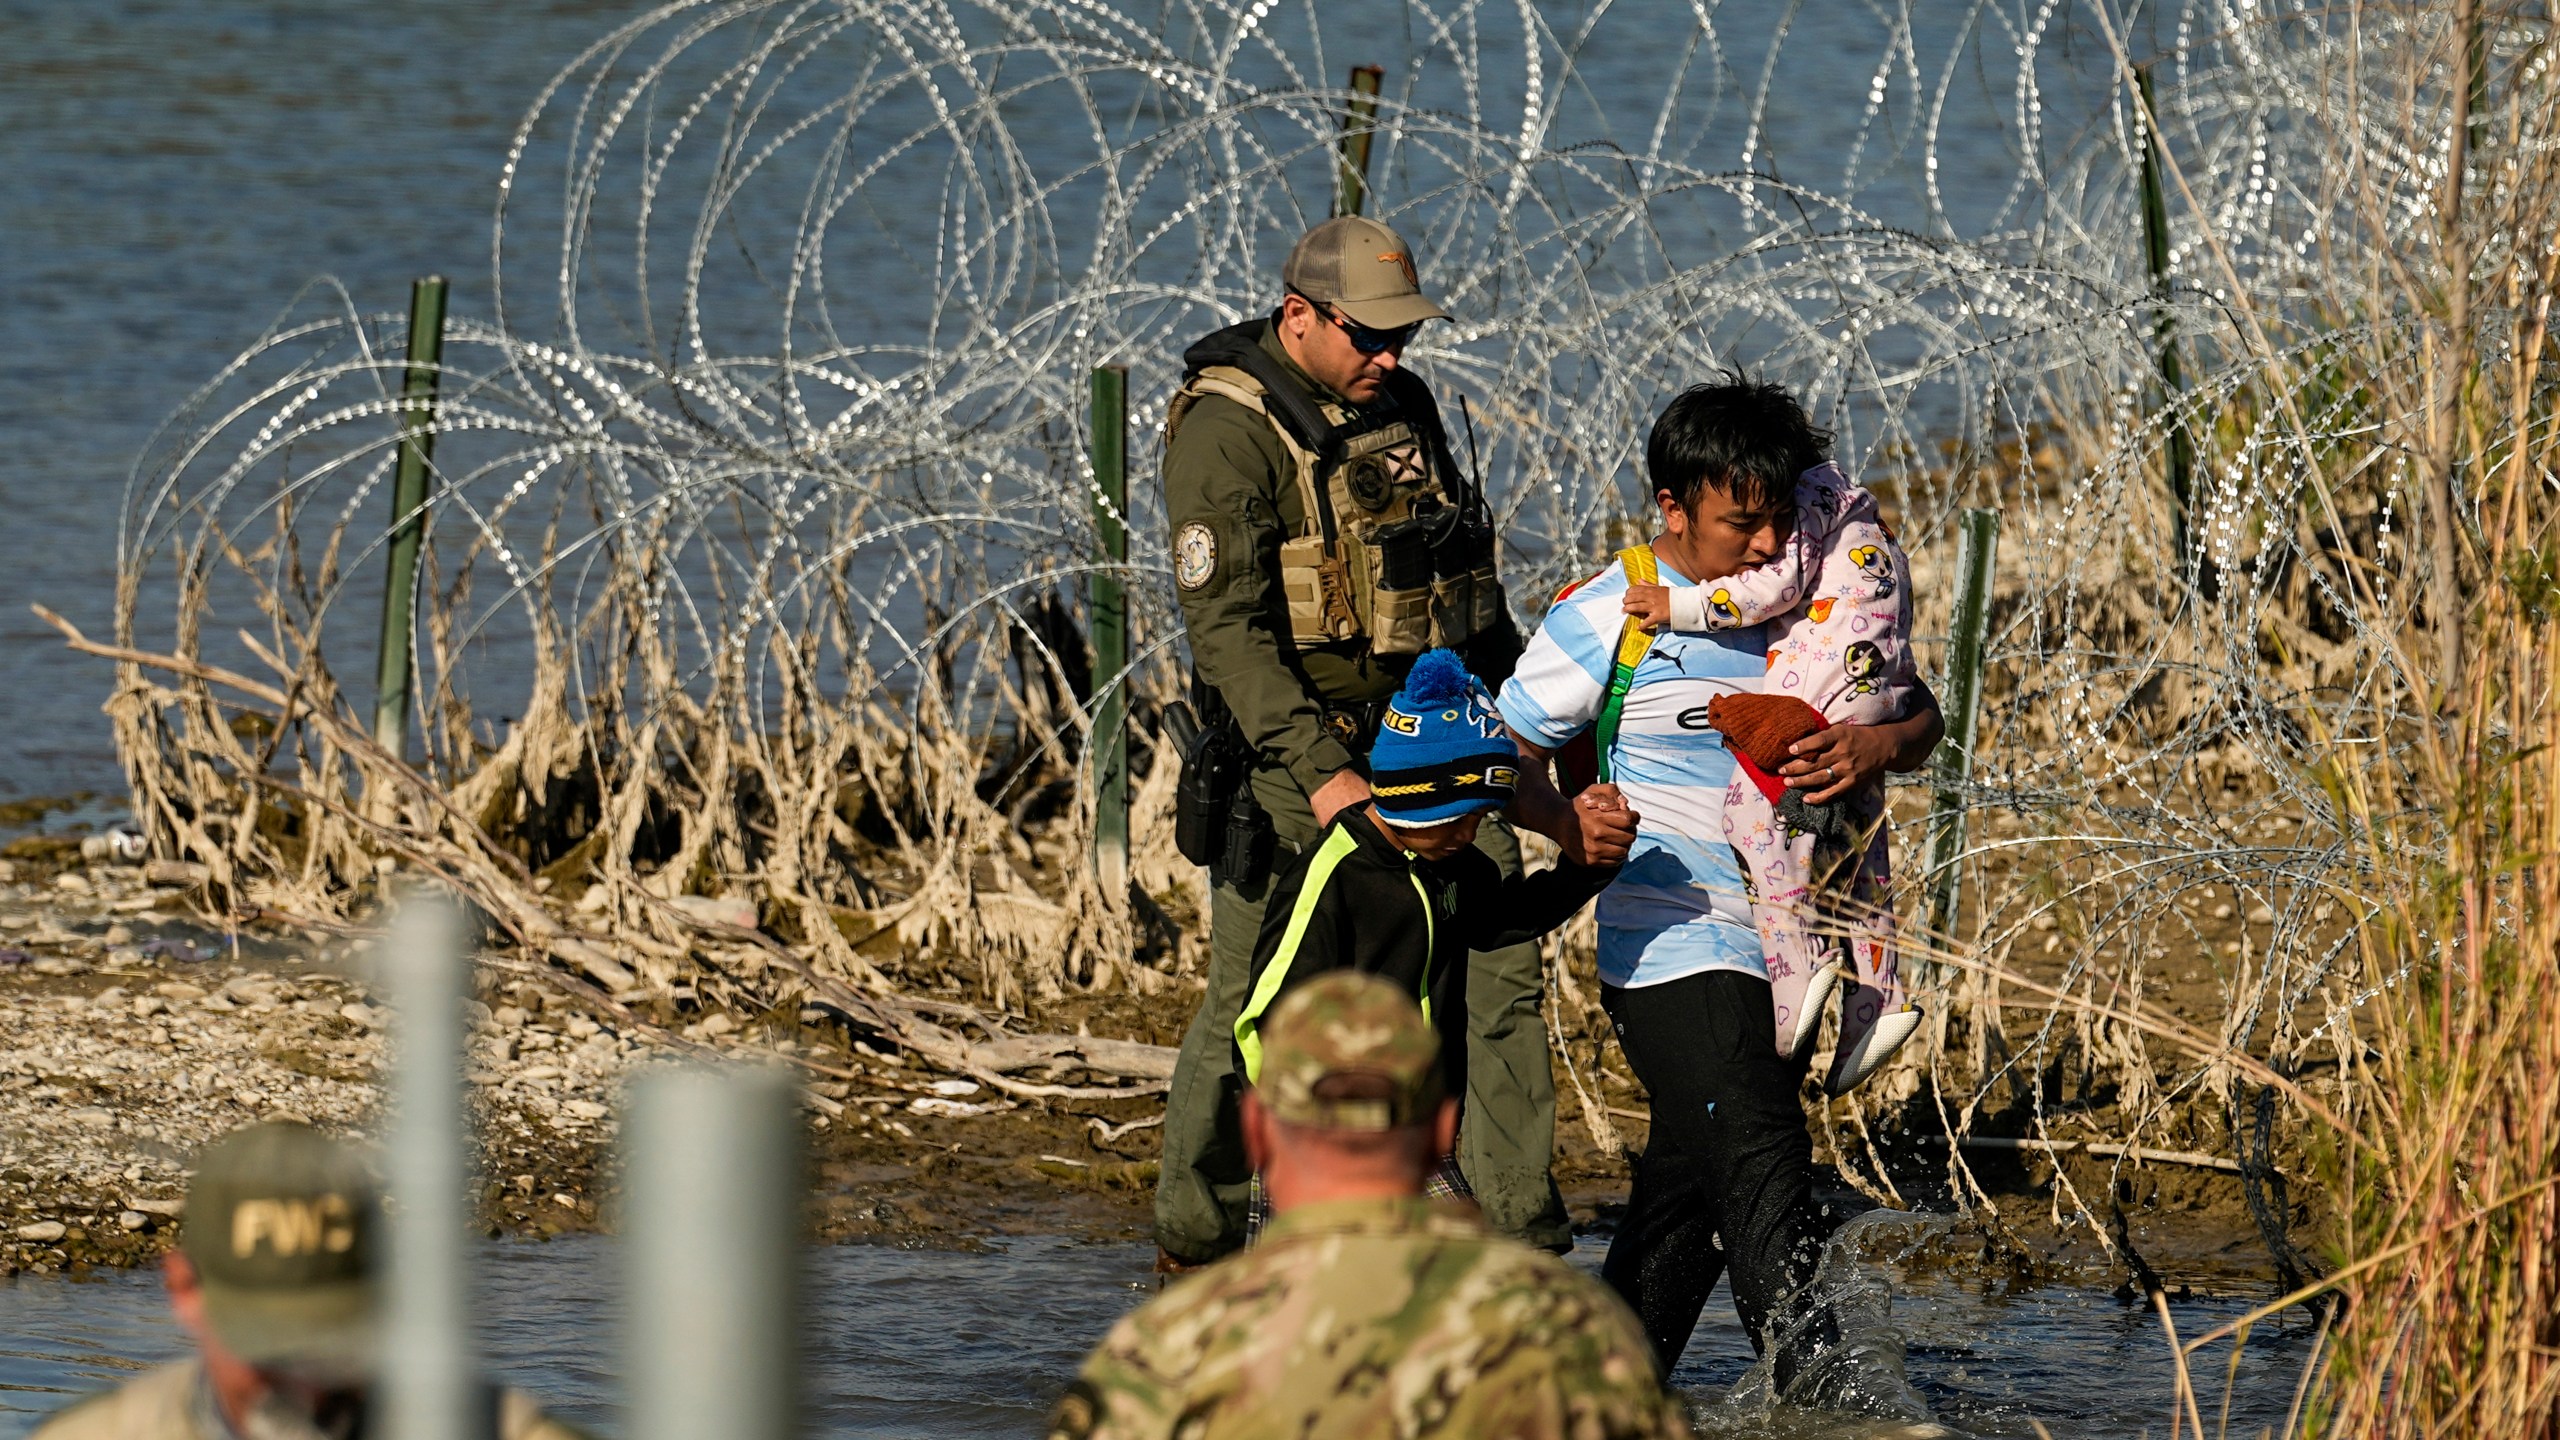 FILE - Migrants are taken into custody by officials at the Texas-Mexico border, Jan. 3, 2024, in Eagle Pass, Texas. The Supreme Court on Tuesday, March 12, 2024 extended a stay on a new Texas law that would empower police to arrest migrants suspected of illegally crossing the U.S.-Mexico border. The order puts the law on hold until at least Monday while the high court considers a challenge by the Justice Department, which has called the law an unconstitutional overreach. (AP Photo/Eric Gay, file)